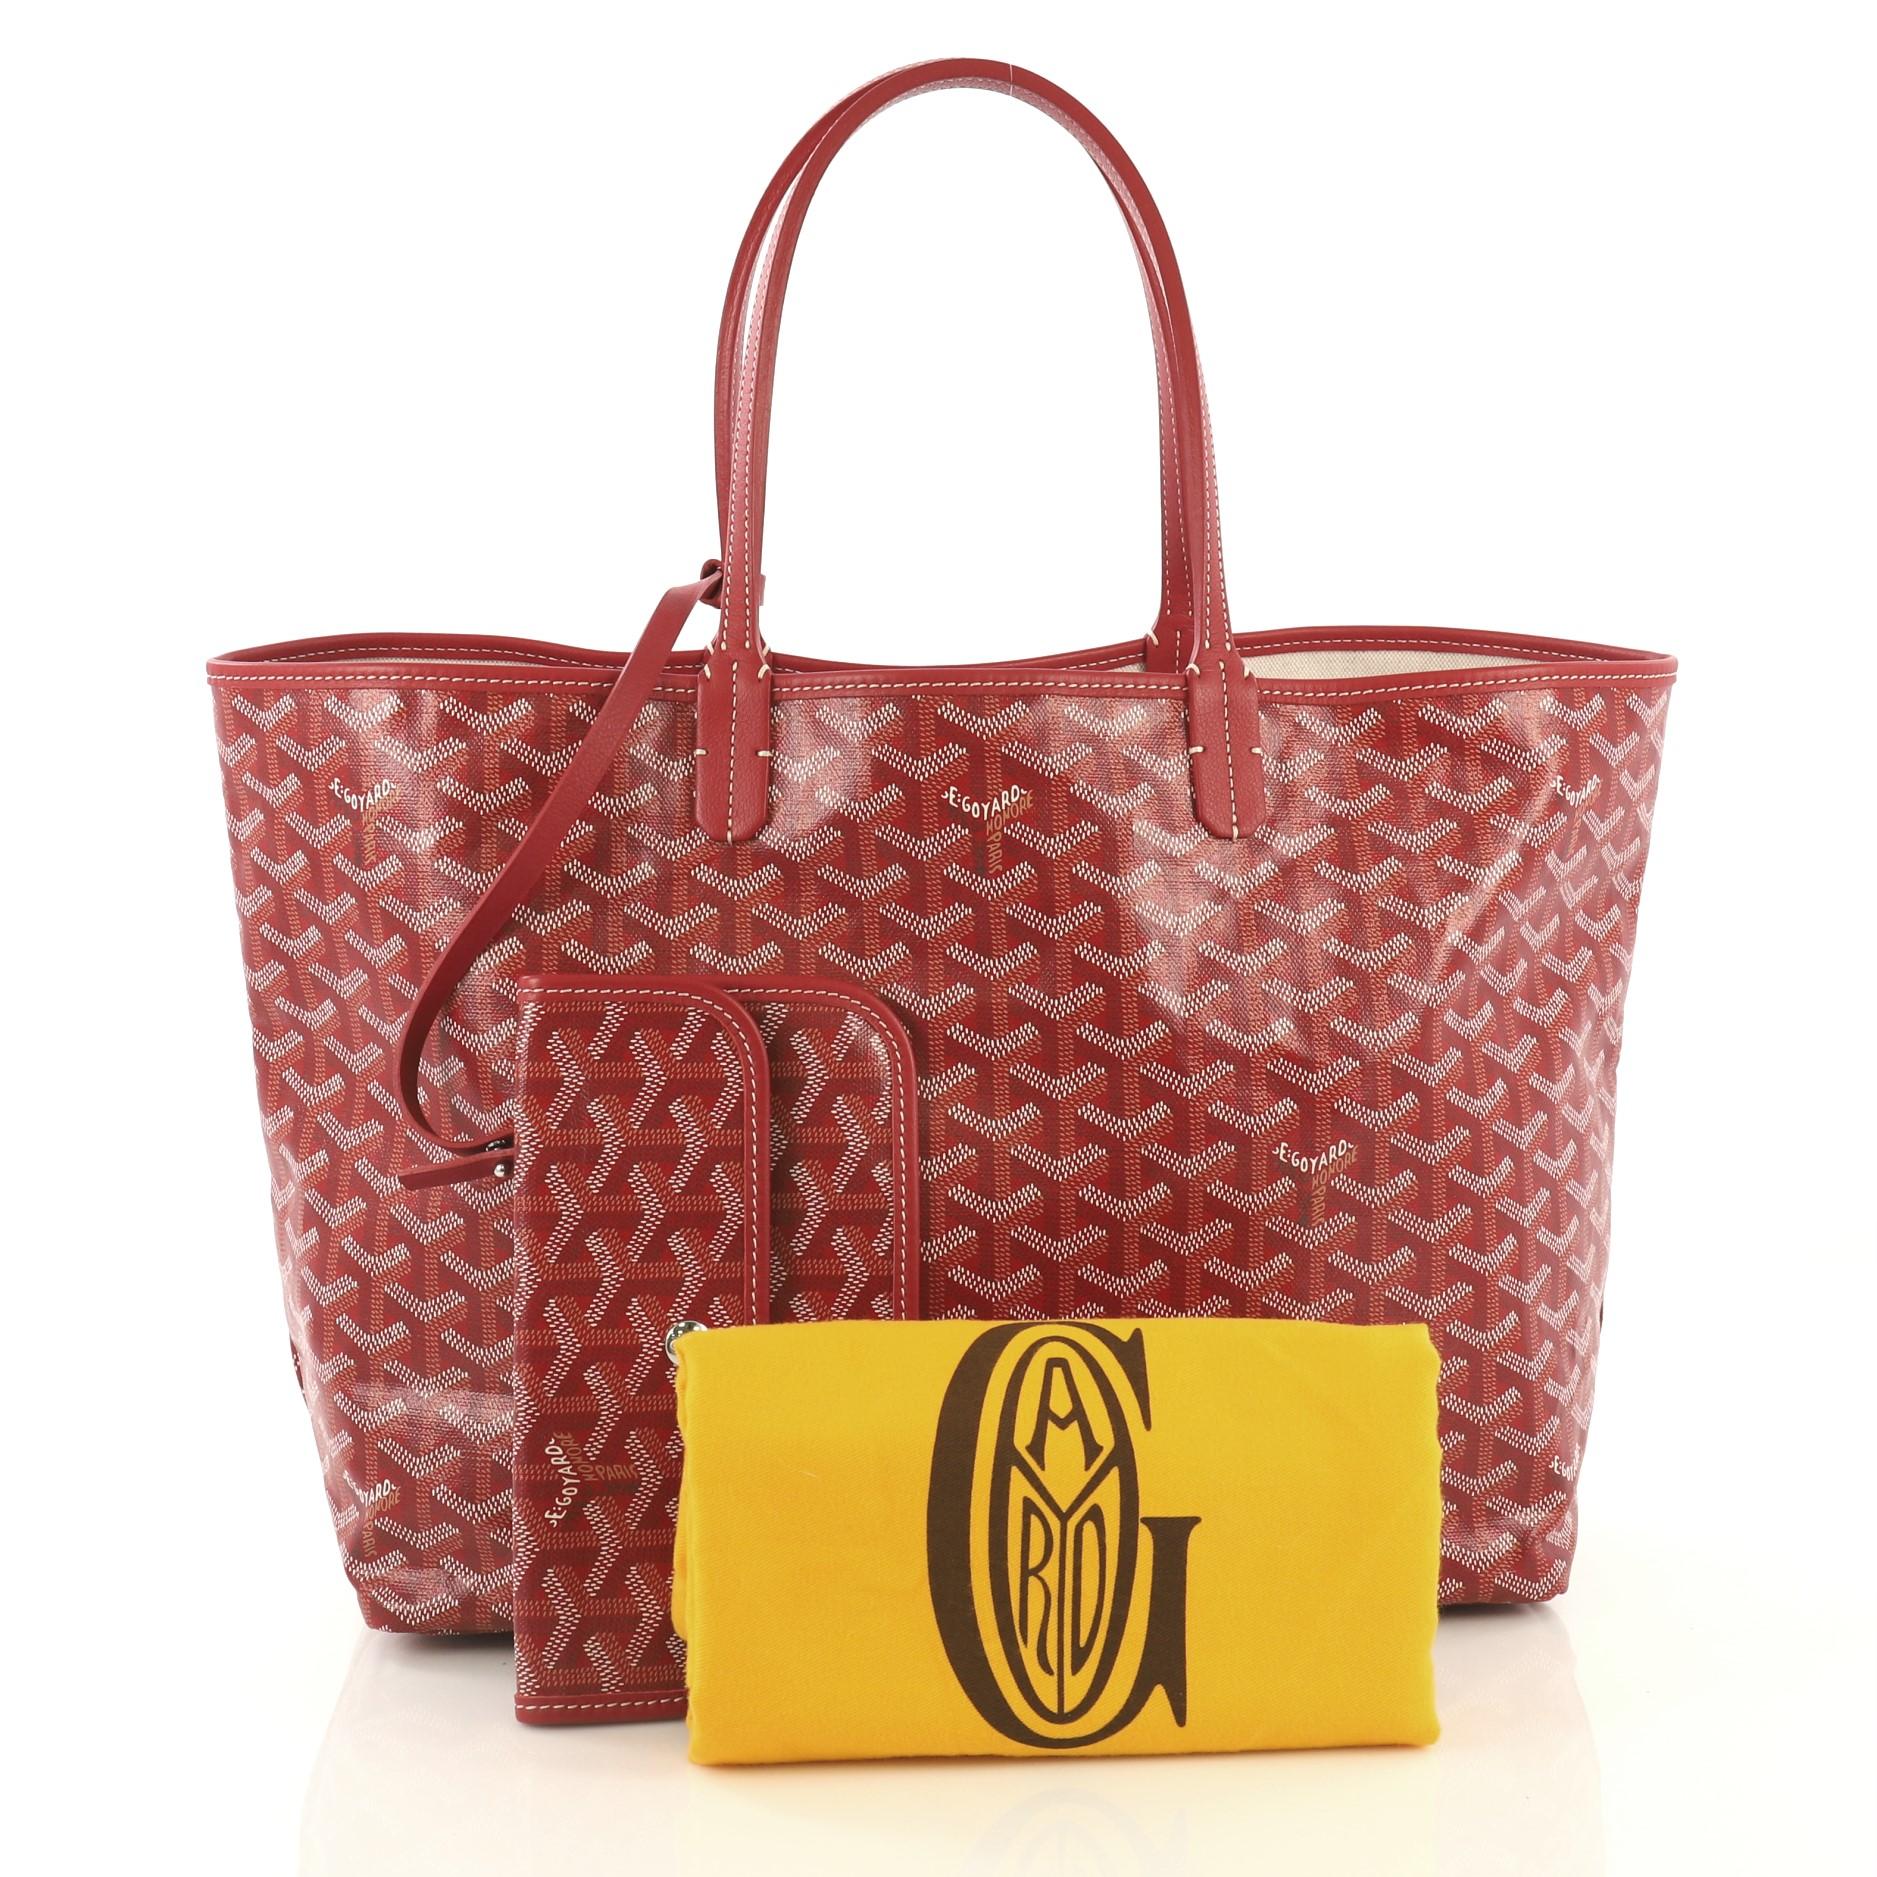 This Goyard St. Louis Tote Coated Canvas PM, crafted from red and white coated canvas, features dual slim leather handles, leather trim, and silver-tone hardware. Its wide open top showcases a beige canvas interior. 

Condition: Excellent. Slight